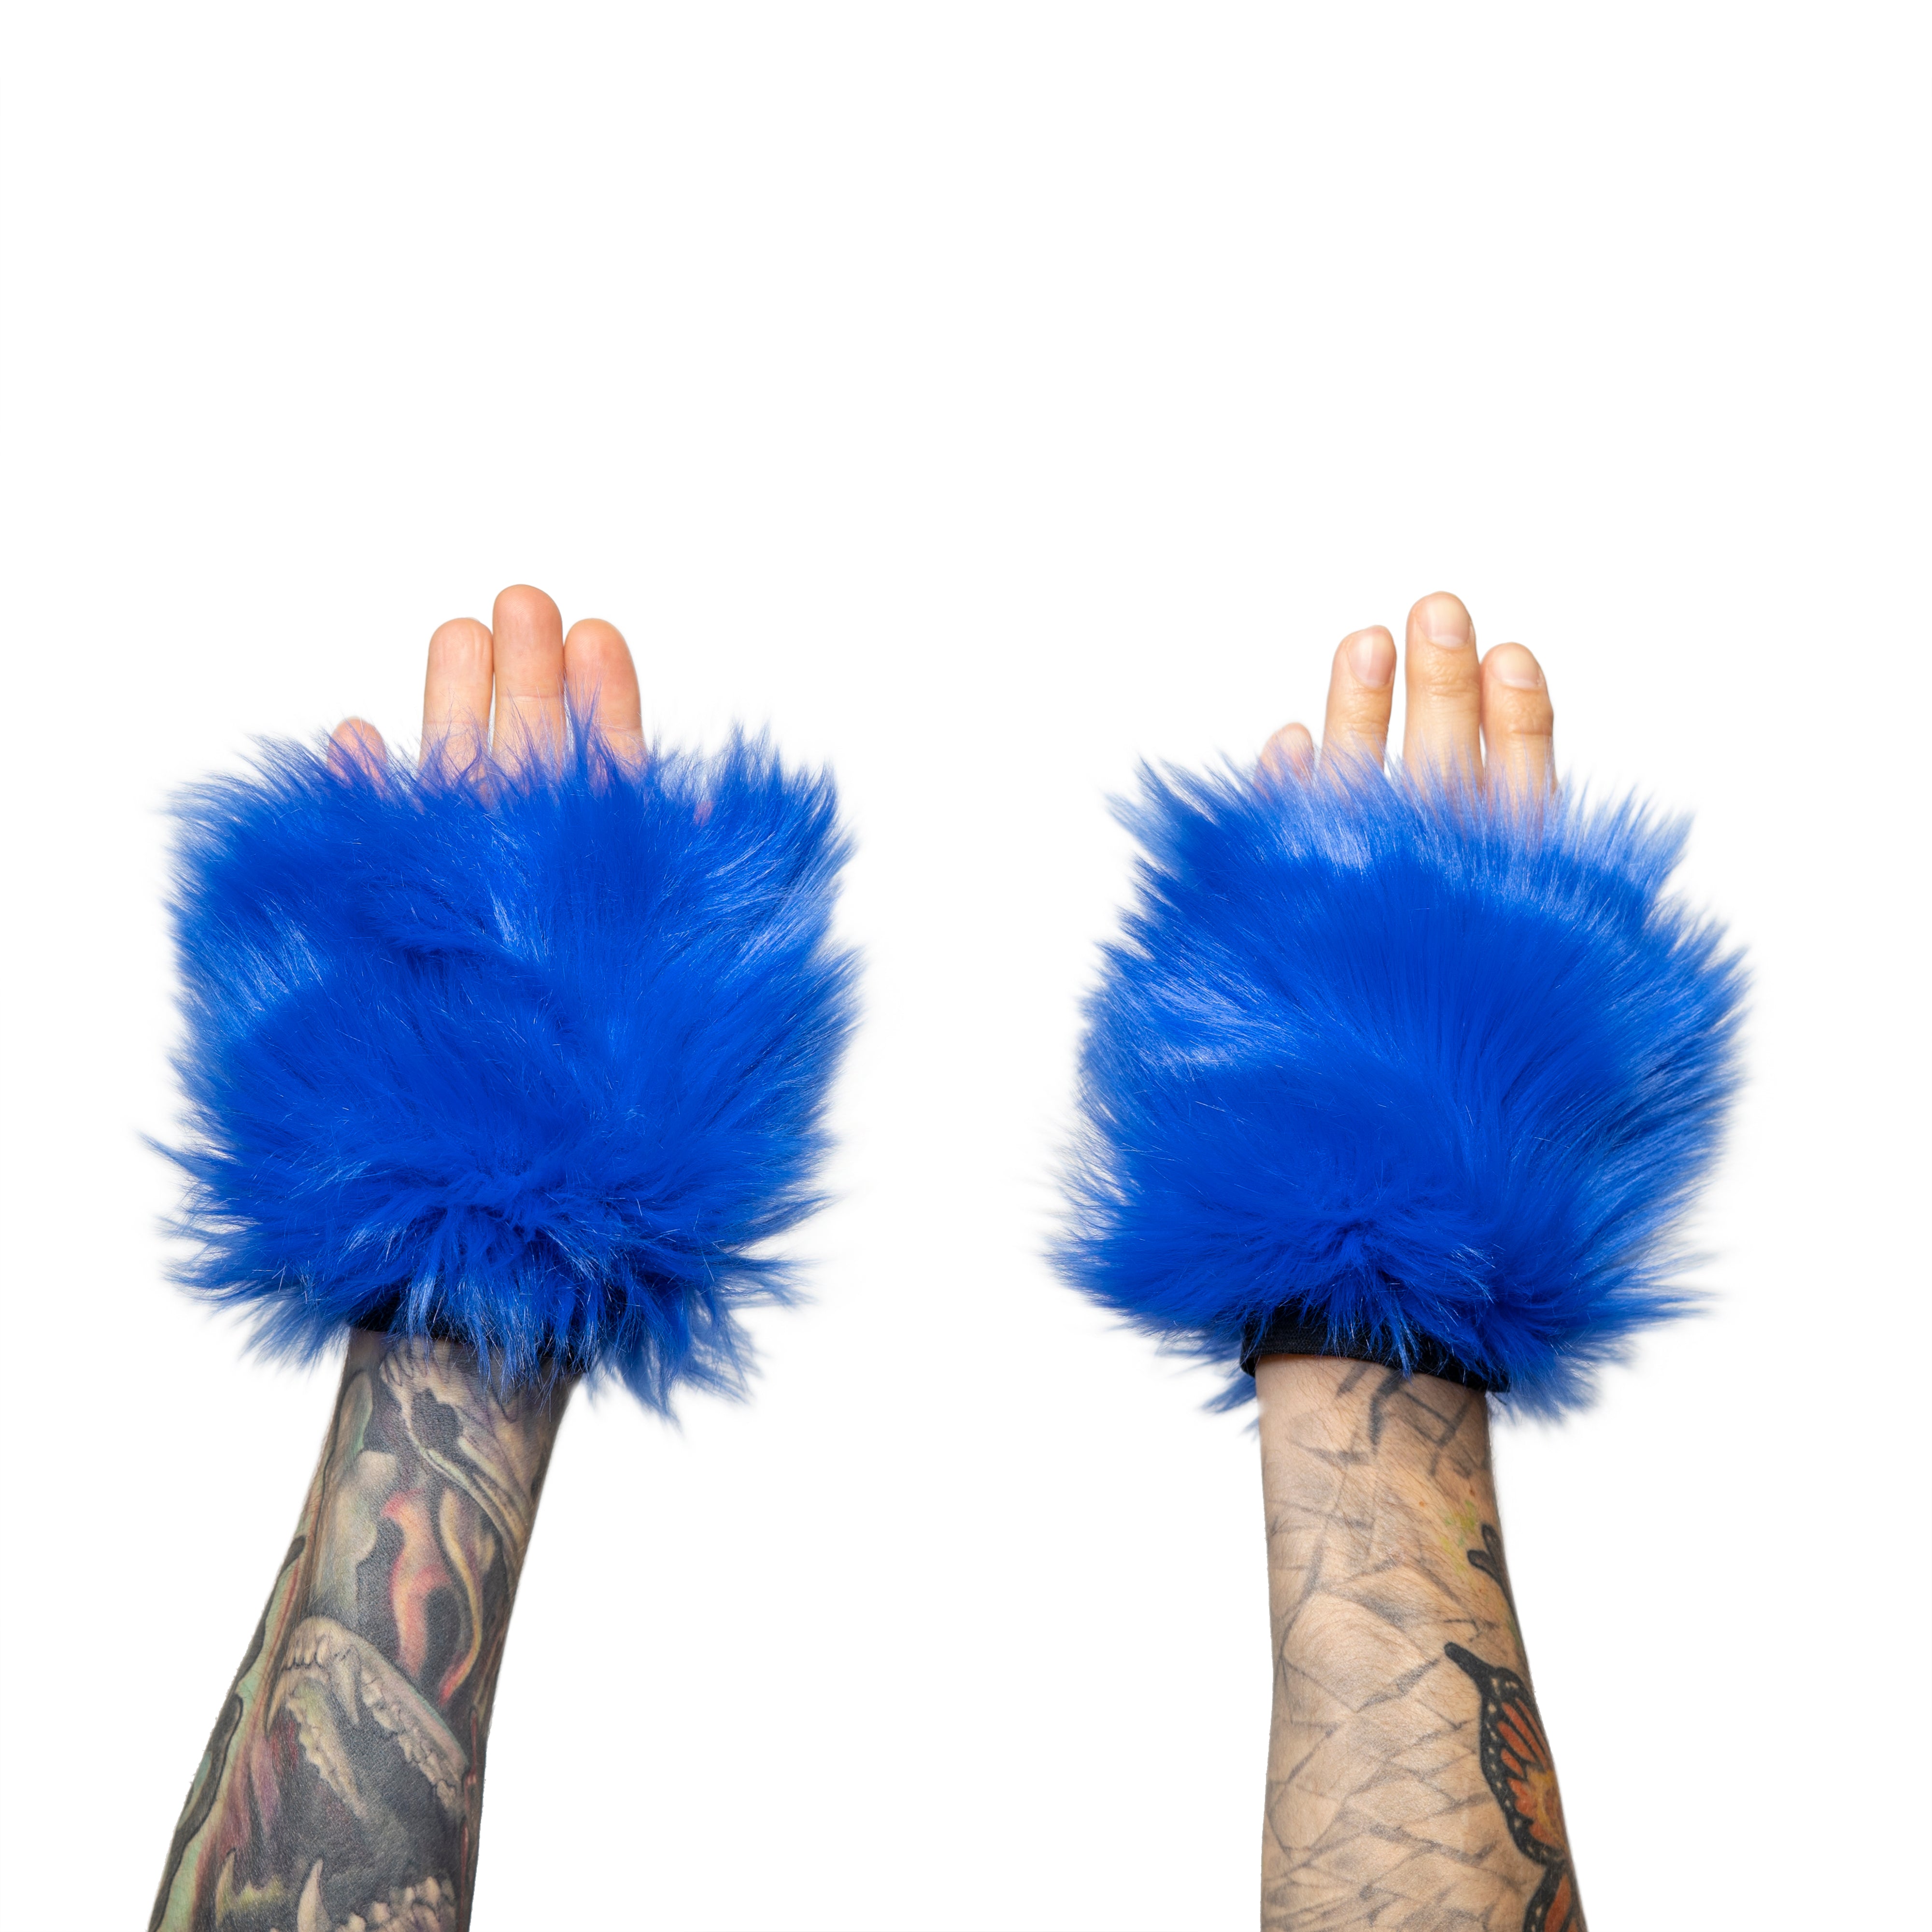 blue Monster Fur Fluffy Cuffs by Pawstar! Furry wrist cuffs made from faux fur for raves, cosplays, halloween, music festivals, and more.